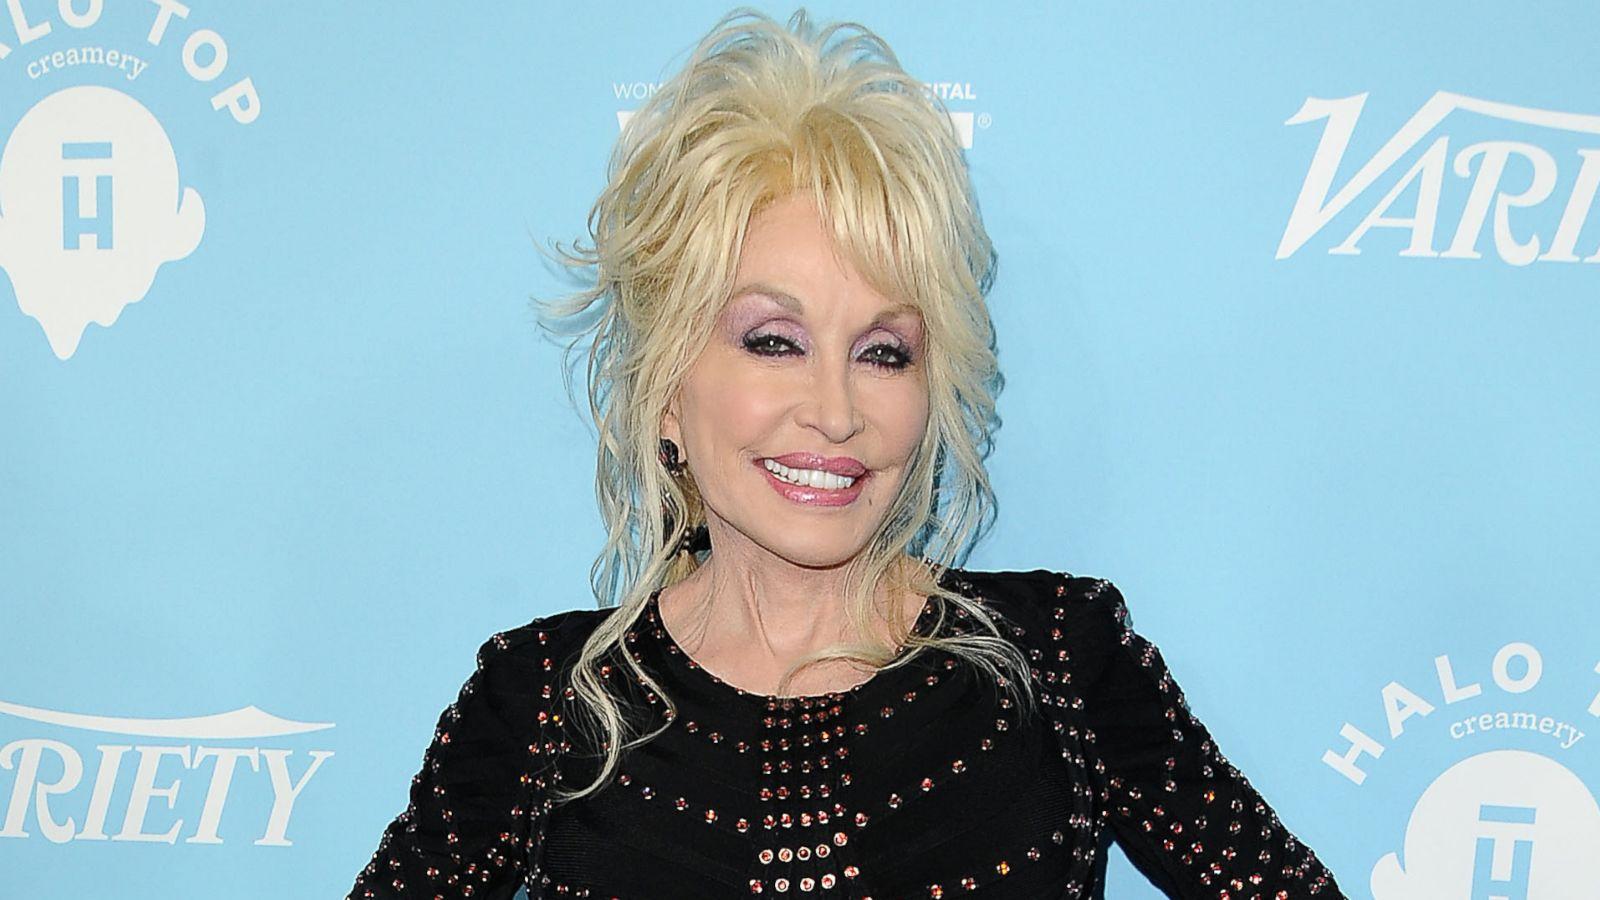 Dolly Parton says '9 to 5' sequel in the works